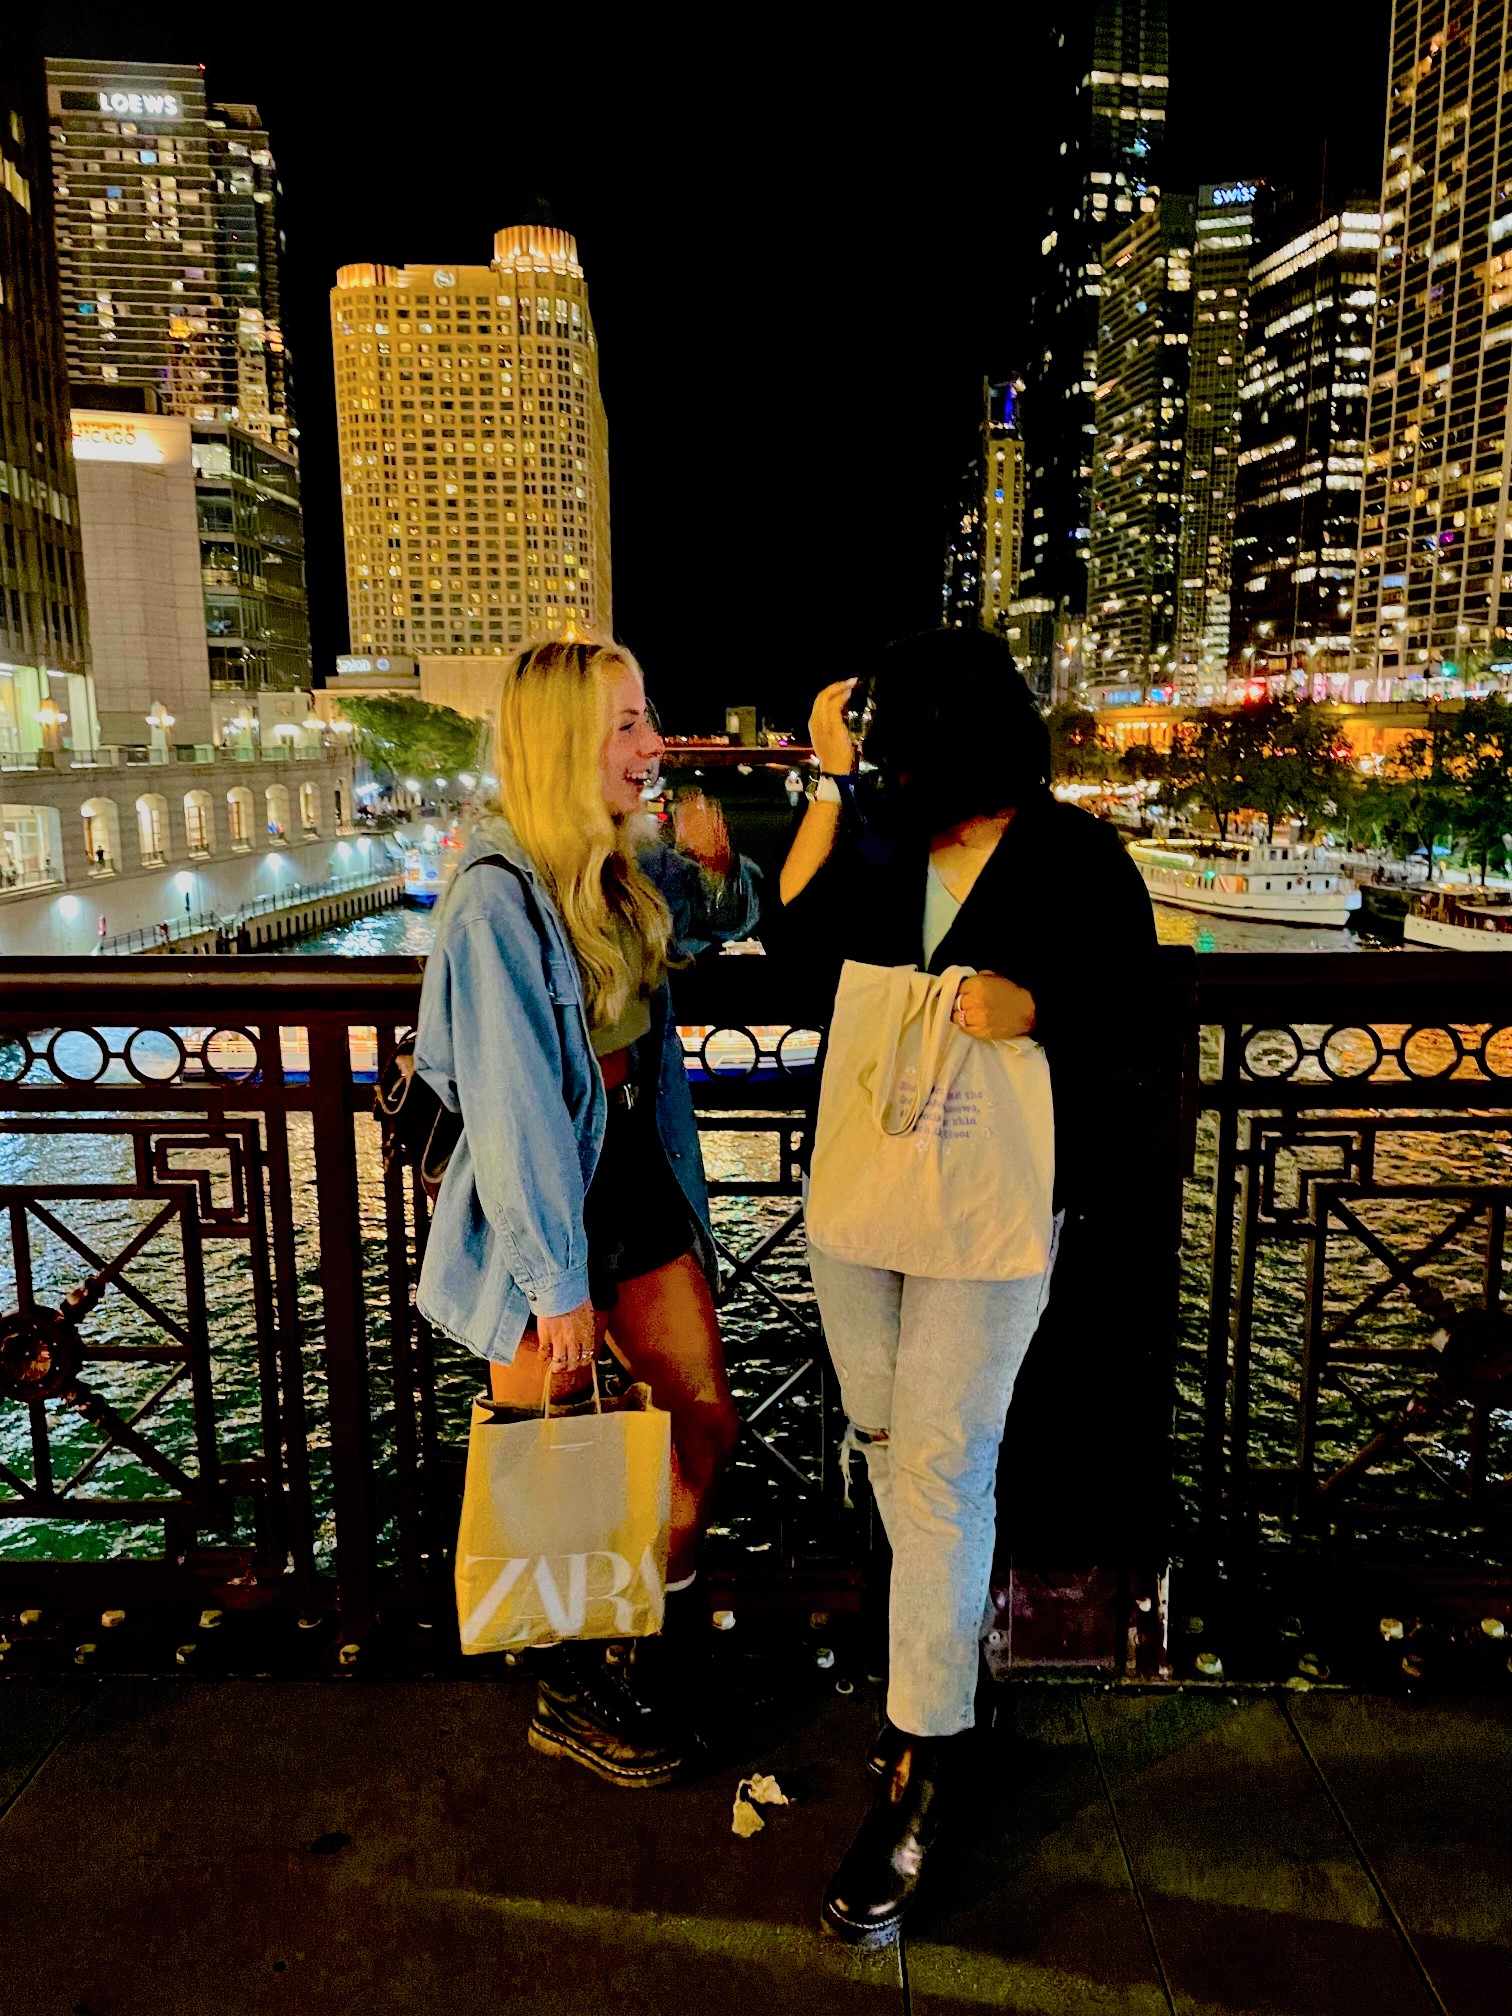 Zara and friend with shopping bag on bridge overlooking skyscrapers at night.